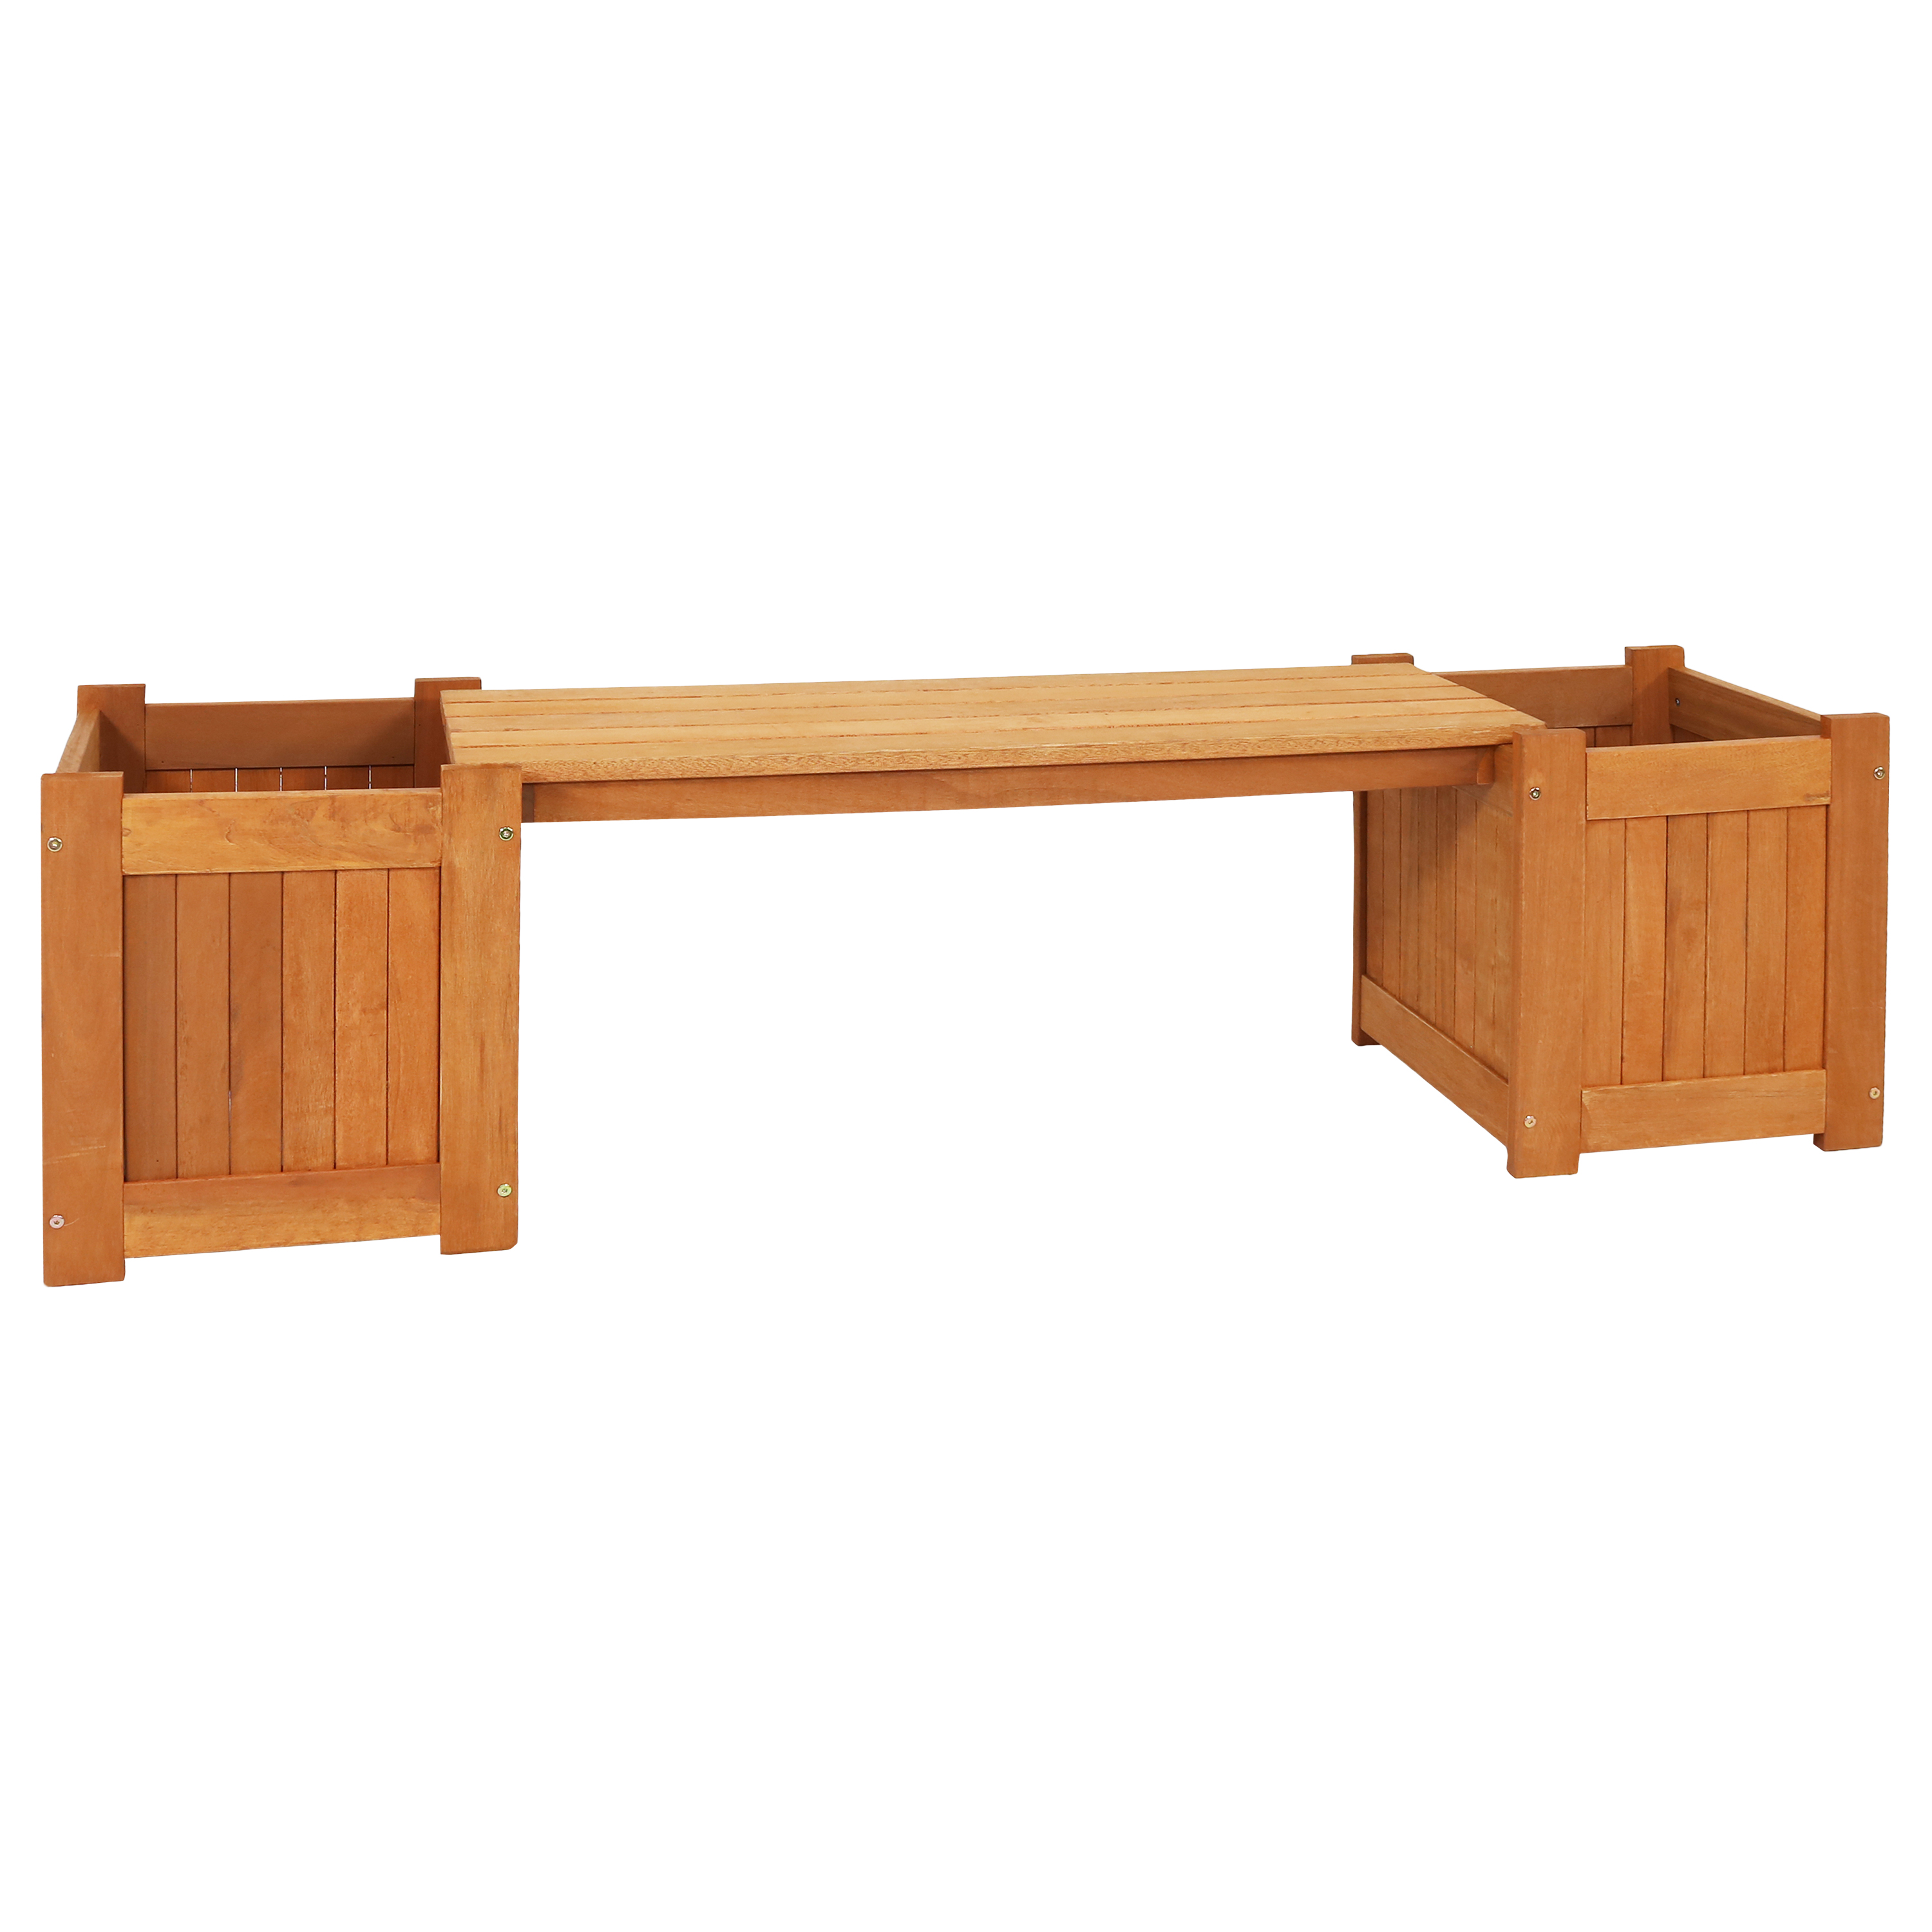 Meranti Wood Outdoor Bench with Planter Boxes